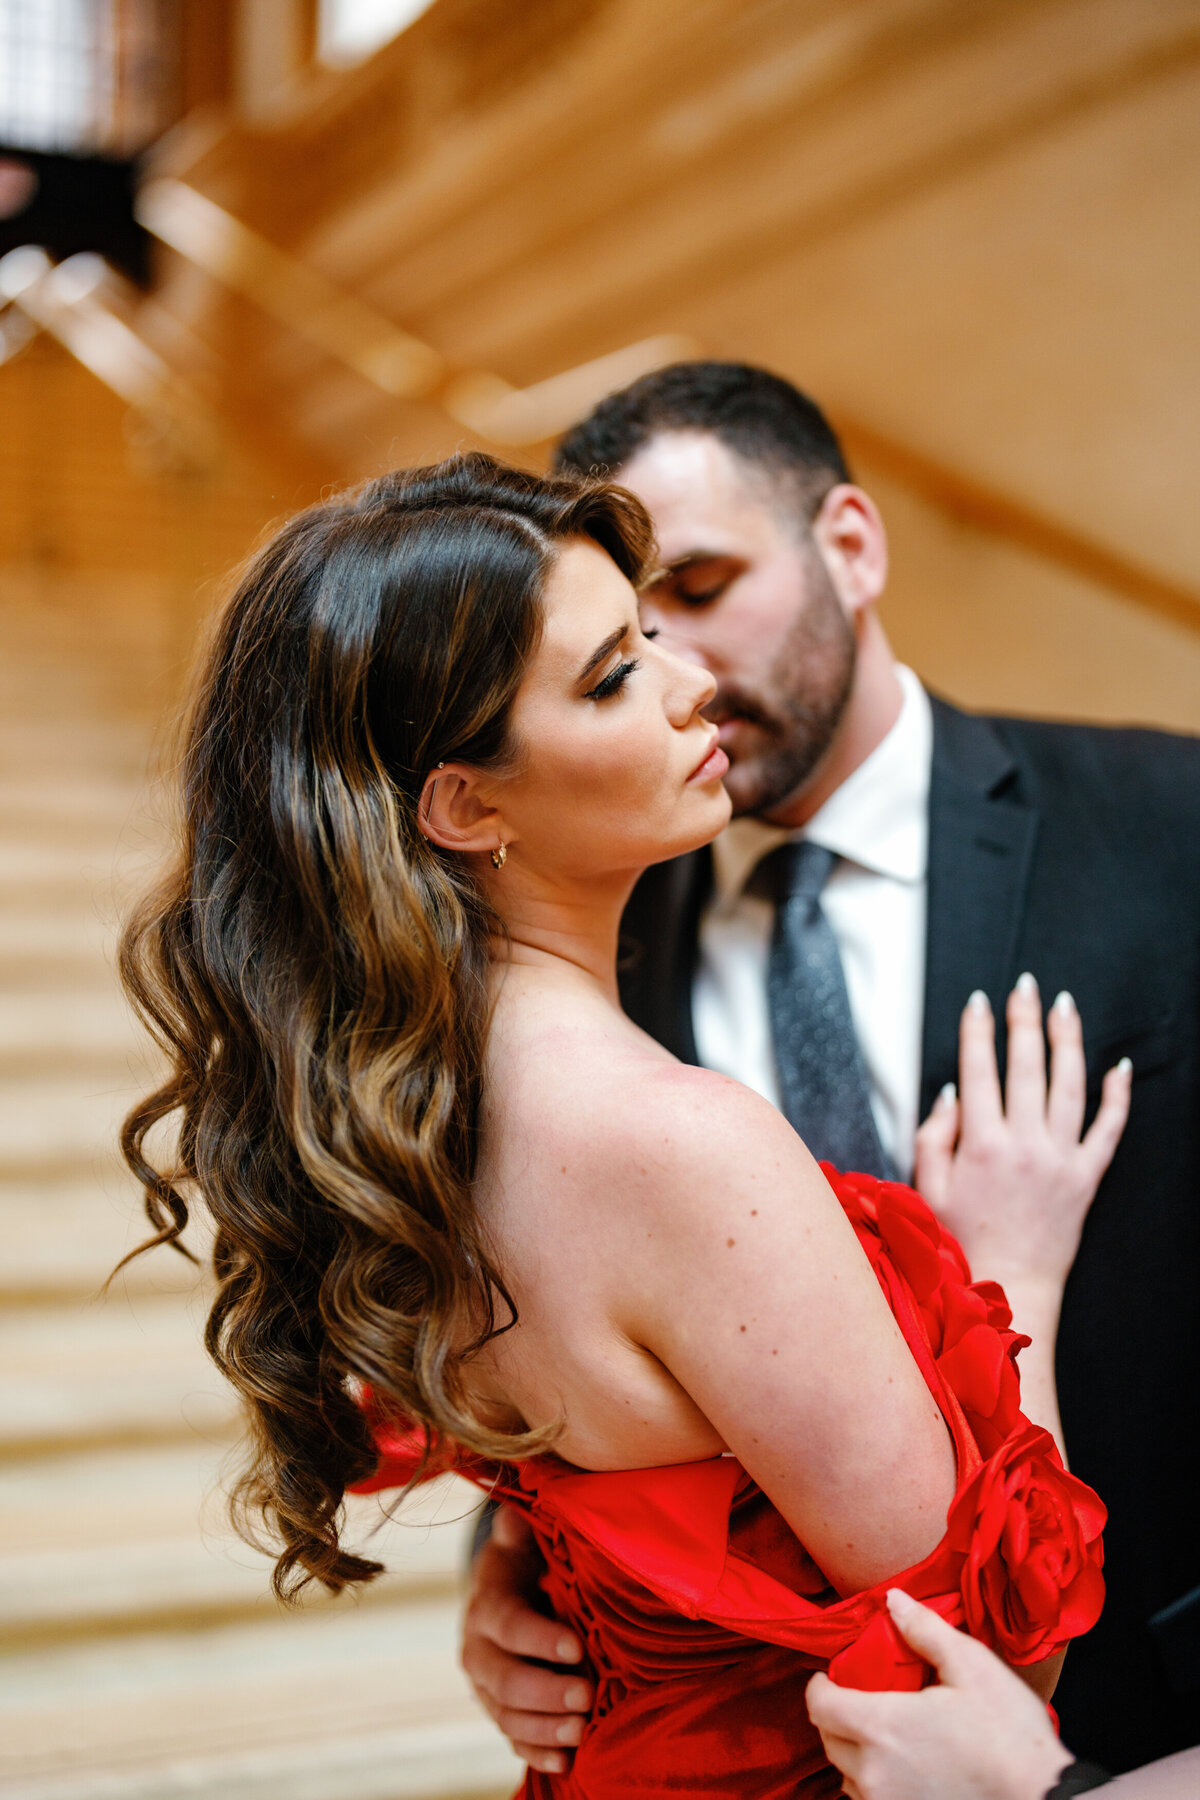 Aspen-Avenue-Chicago-Wedding-Photographer-Union-Station-Chicago-Theater-Engagement-Session-Timeless-Romantic-Red-Dress-Editorial-Stemming-From-Love-Bry-Jean-Artistry-The-Bridal-Collective-True-to-color-Luxury-FAV-25